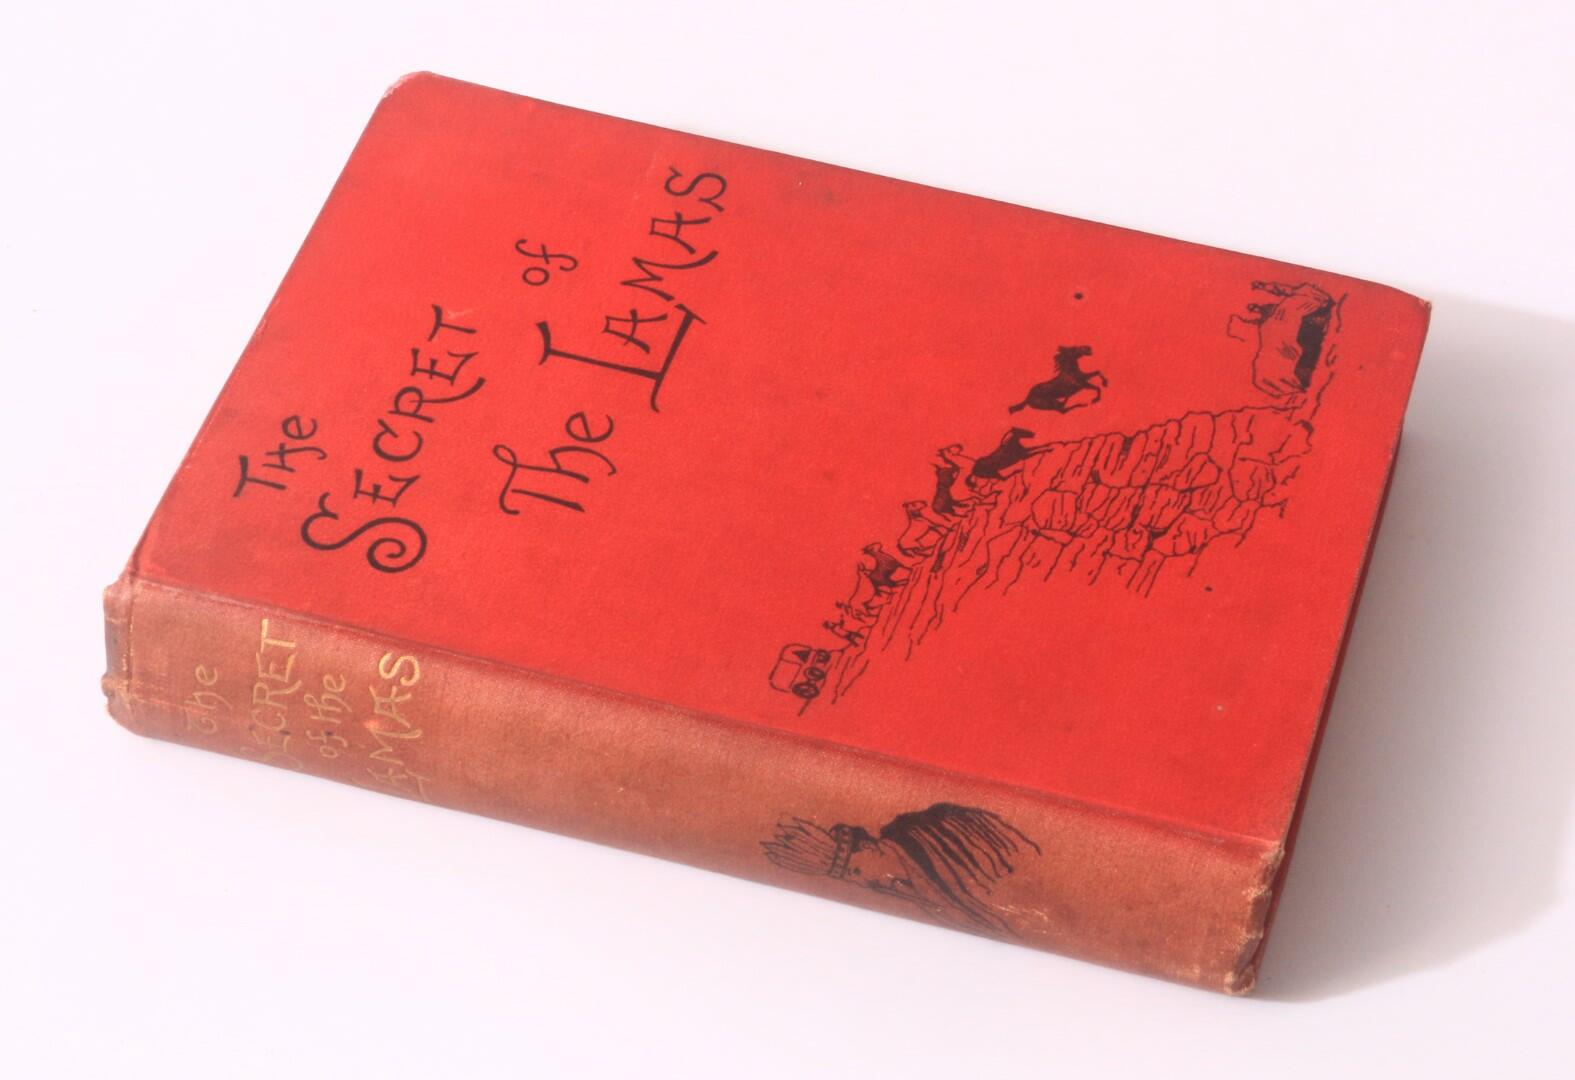 Anonymous - The Secret of the Lamas: A Tale of Thibet - Cassell, 1889, First Edition.